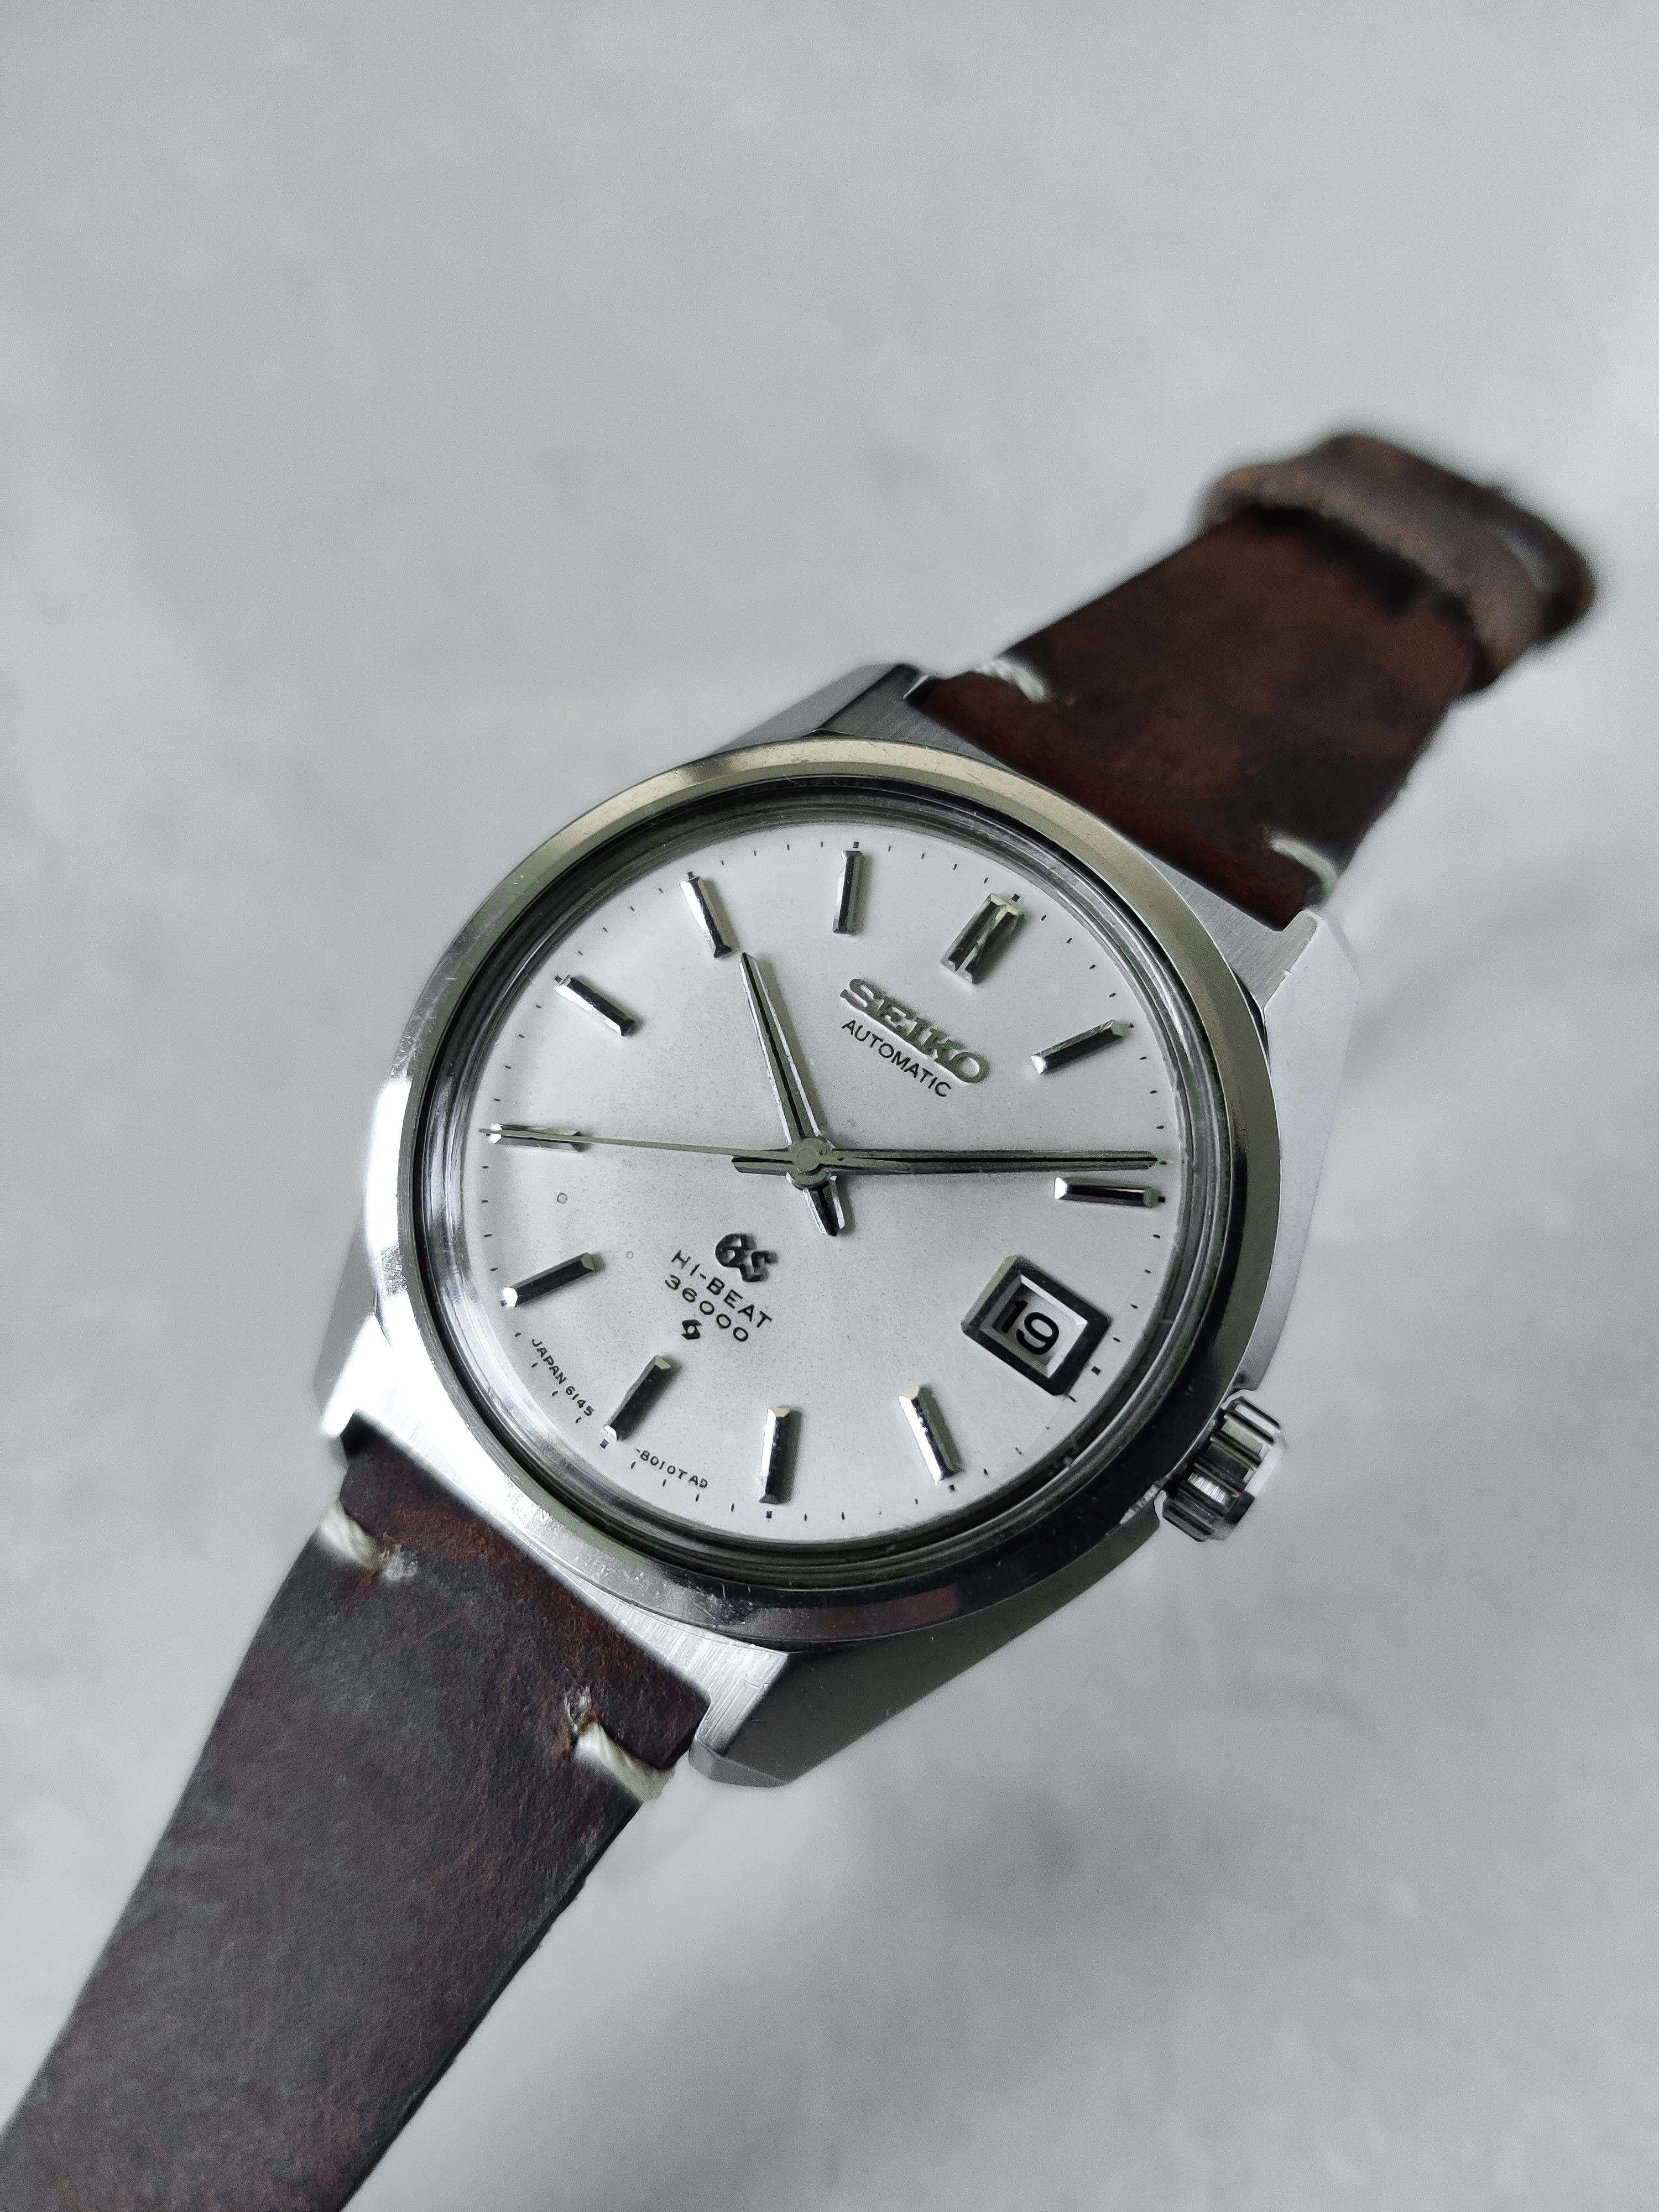 Grand Seiko 6145-8000 from 1969